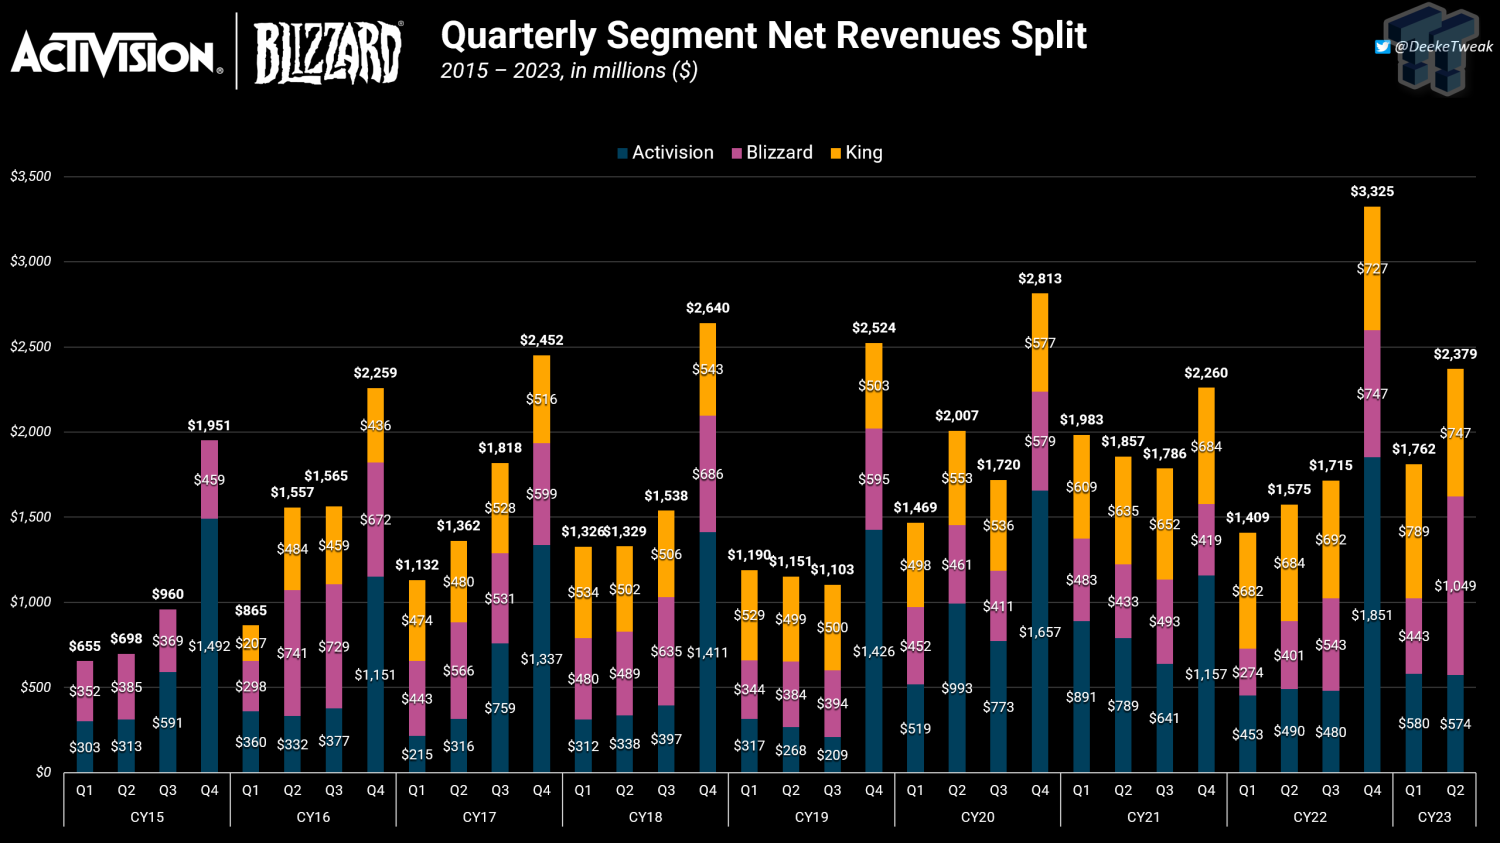 92478_20_blizzard-makes-lions-share-of-activision-revenues-for-the-first-time-in-years_full.png